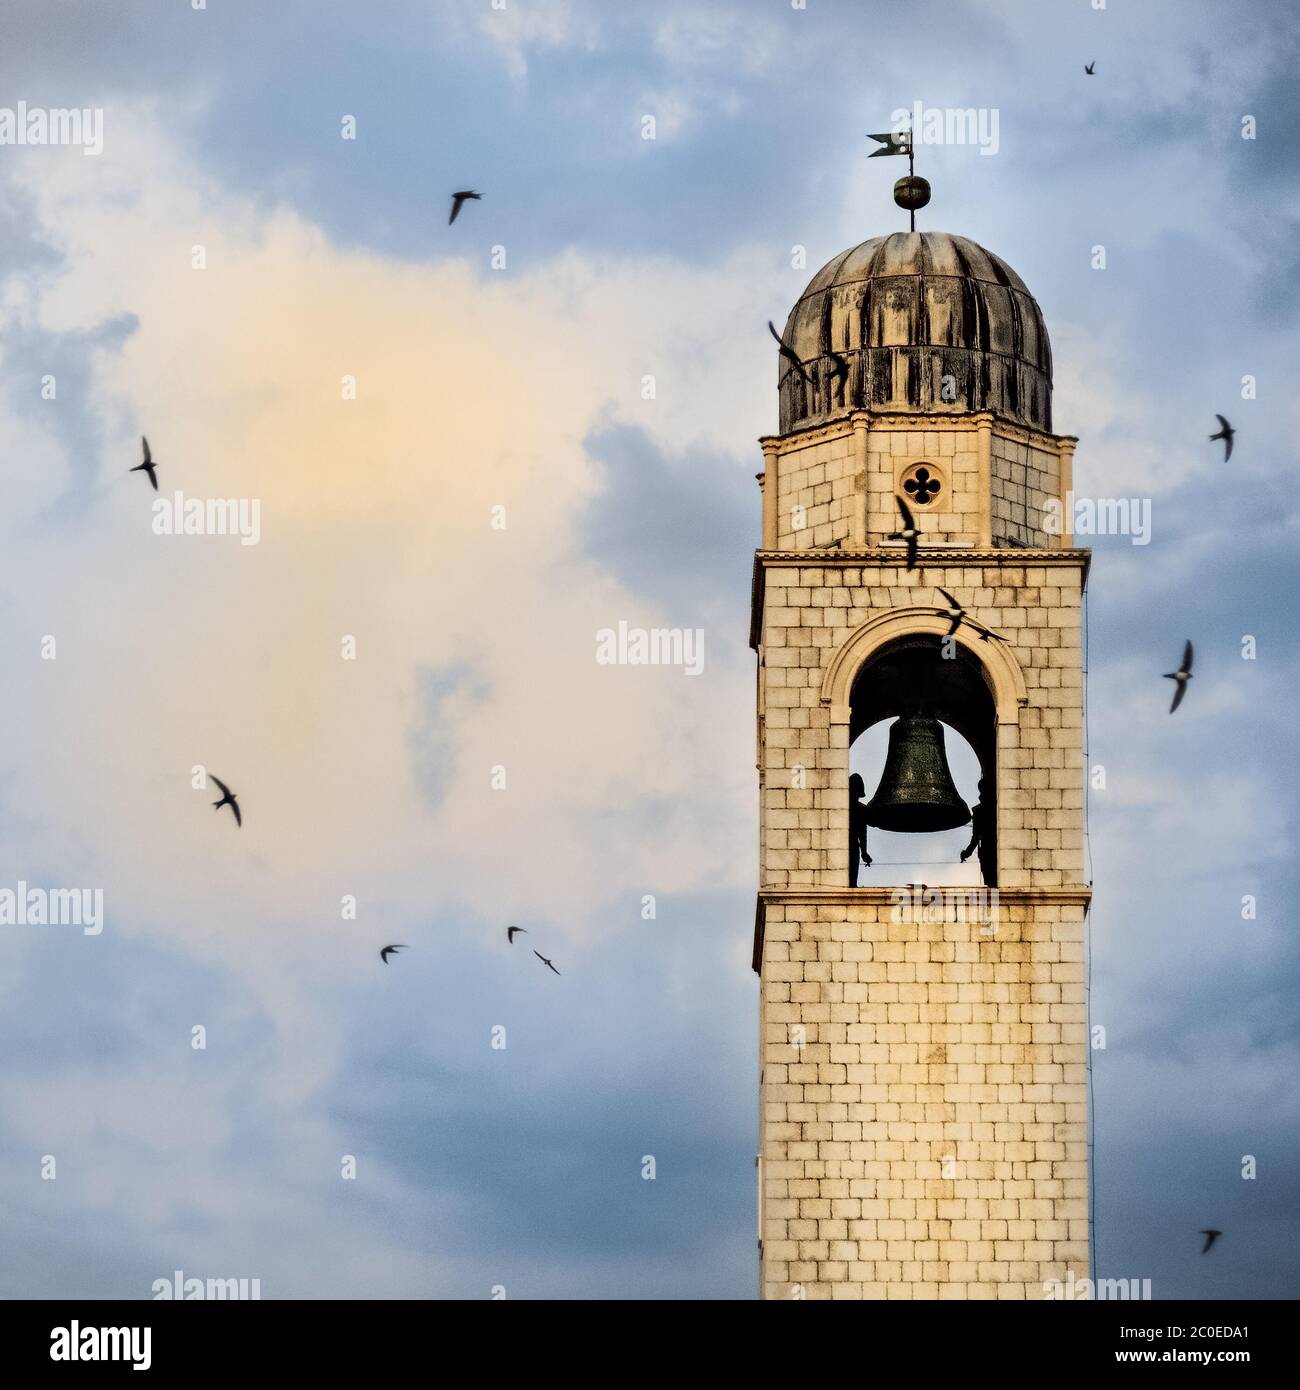 Swallows circling the clock tower in Dubrovnik Stock Photo